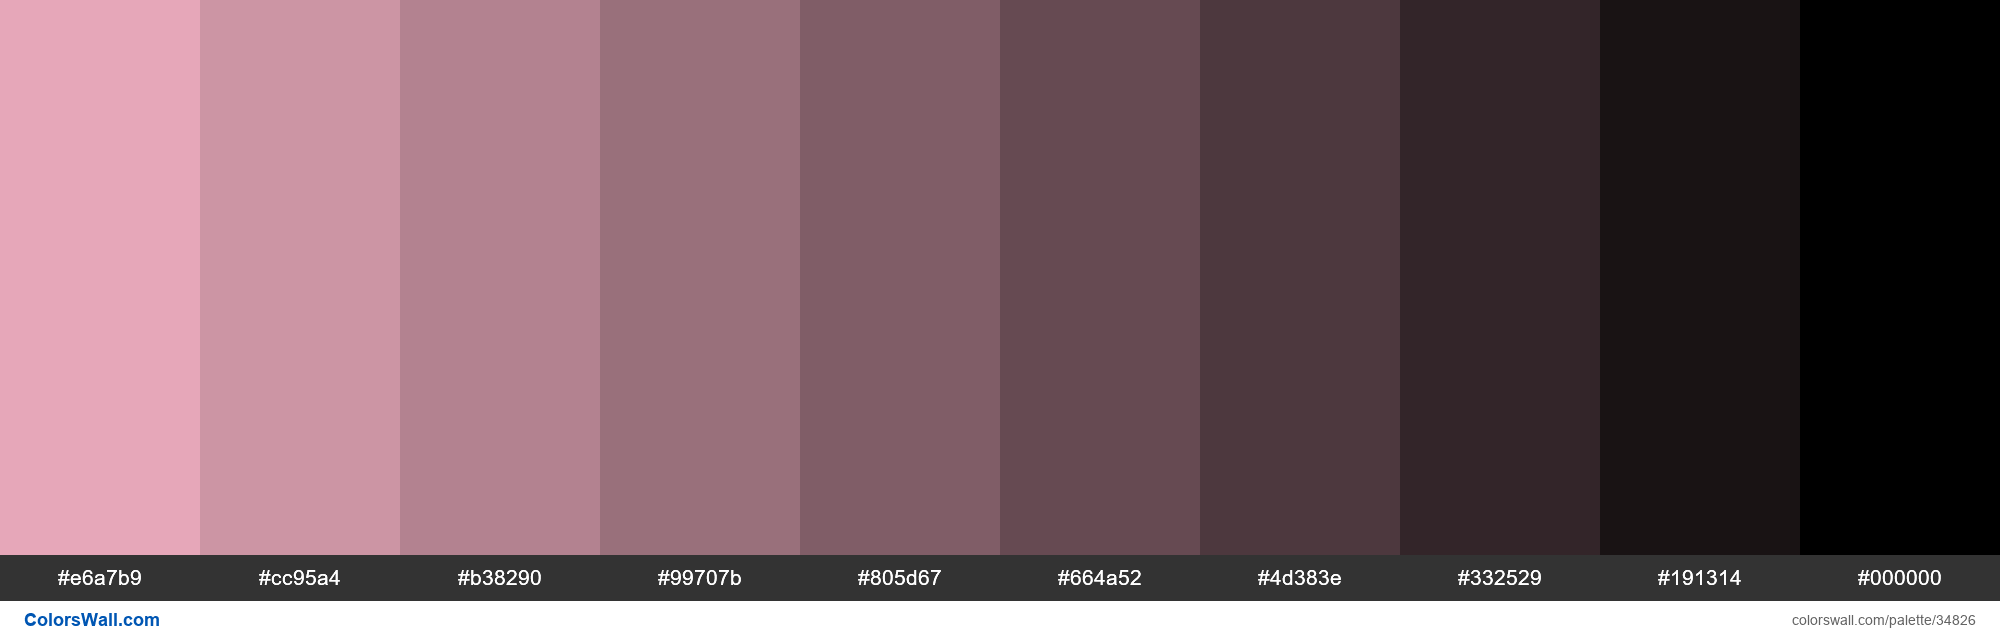 Shades XKCD Color pastel pink #ffbacd hex colors palette - ColorsWall